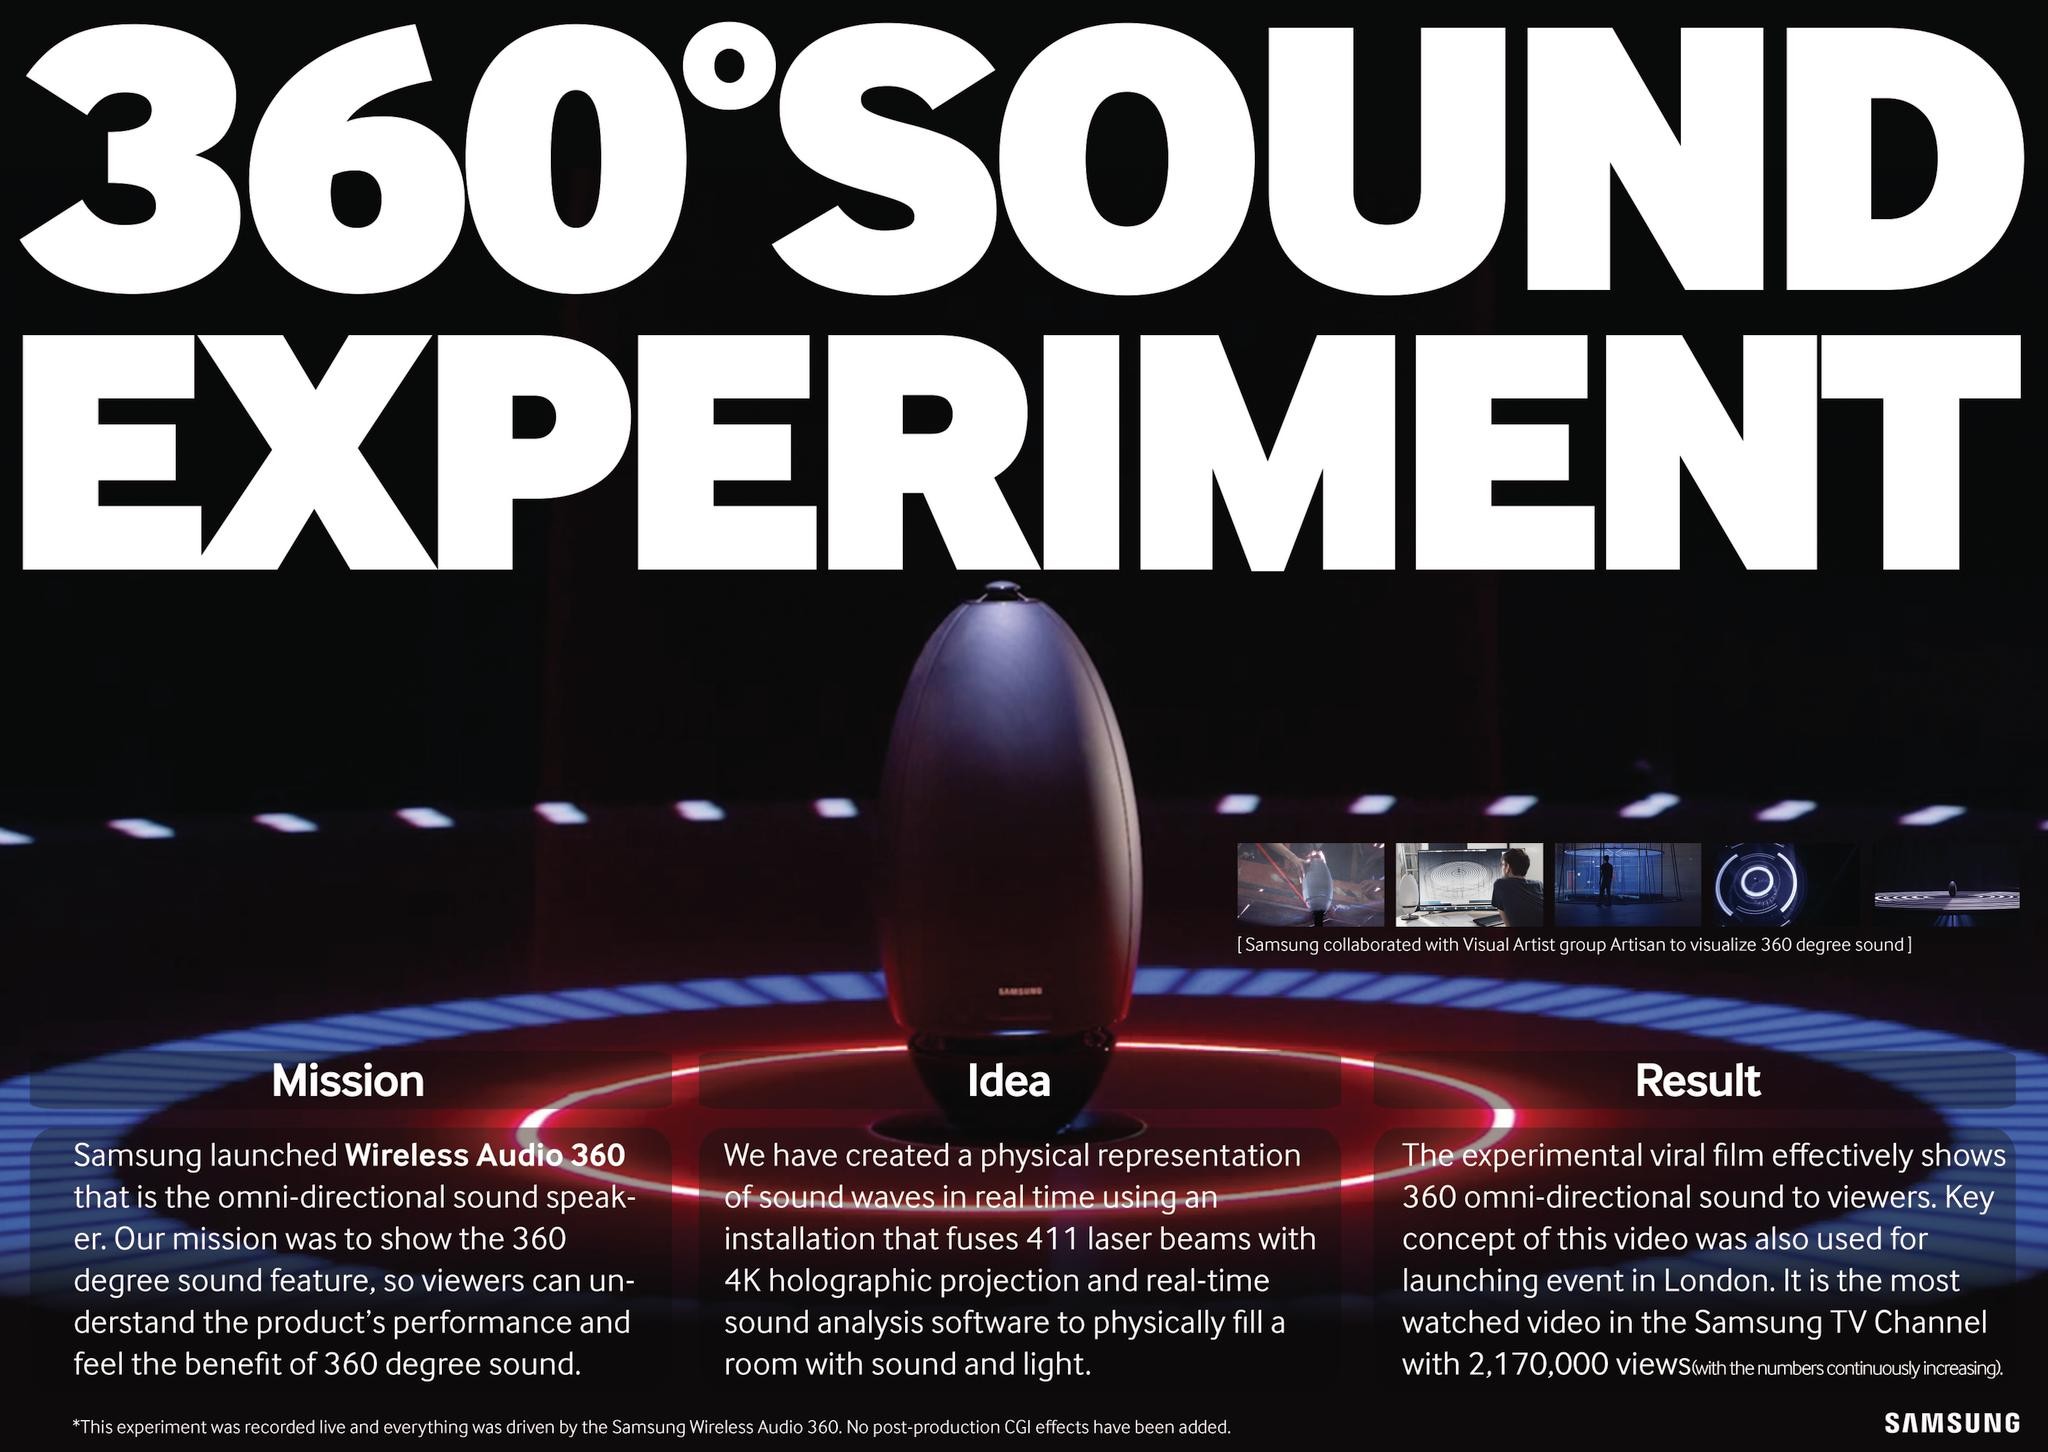 The 360° Sound Experiment 